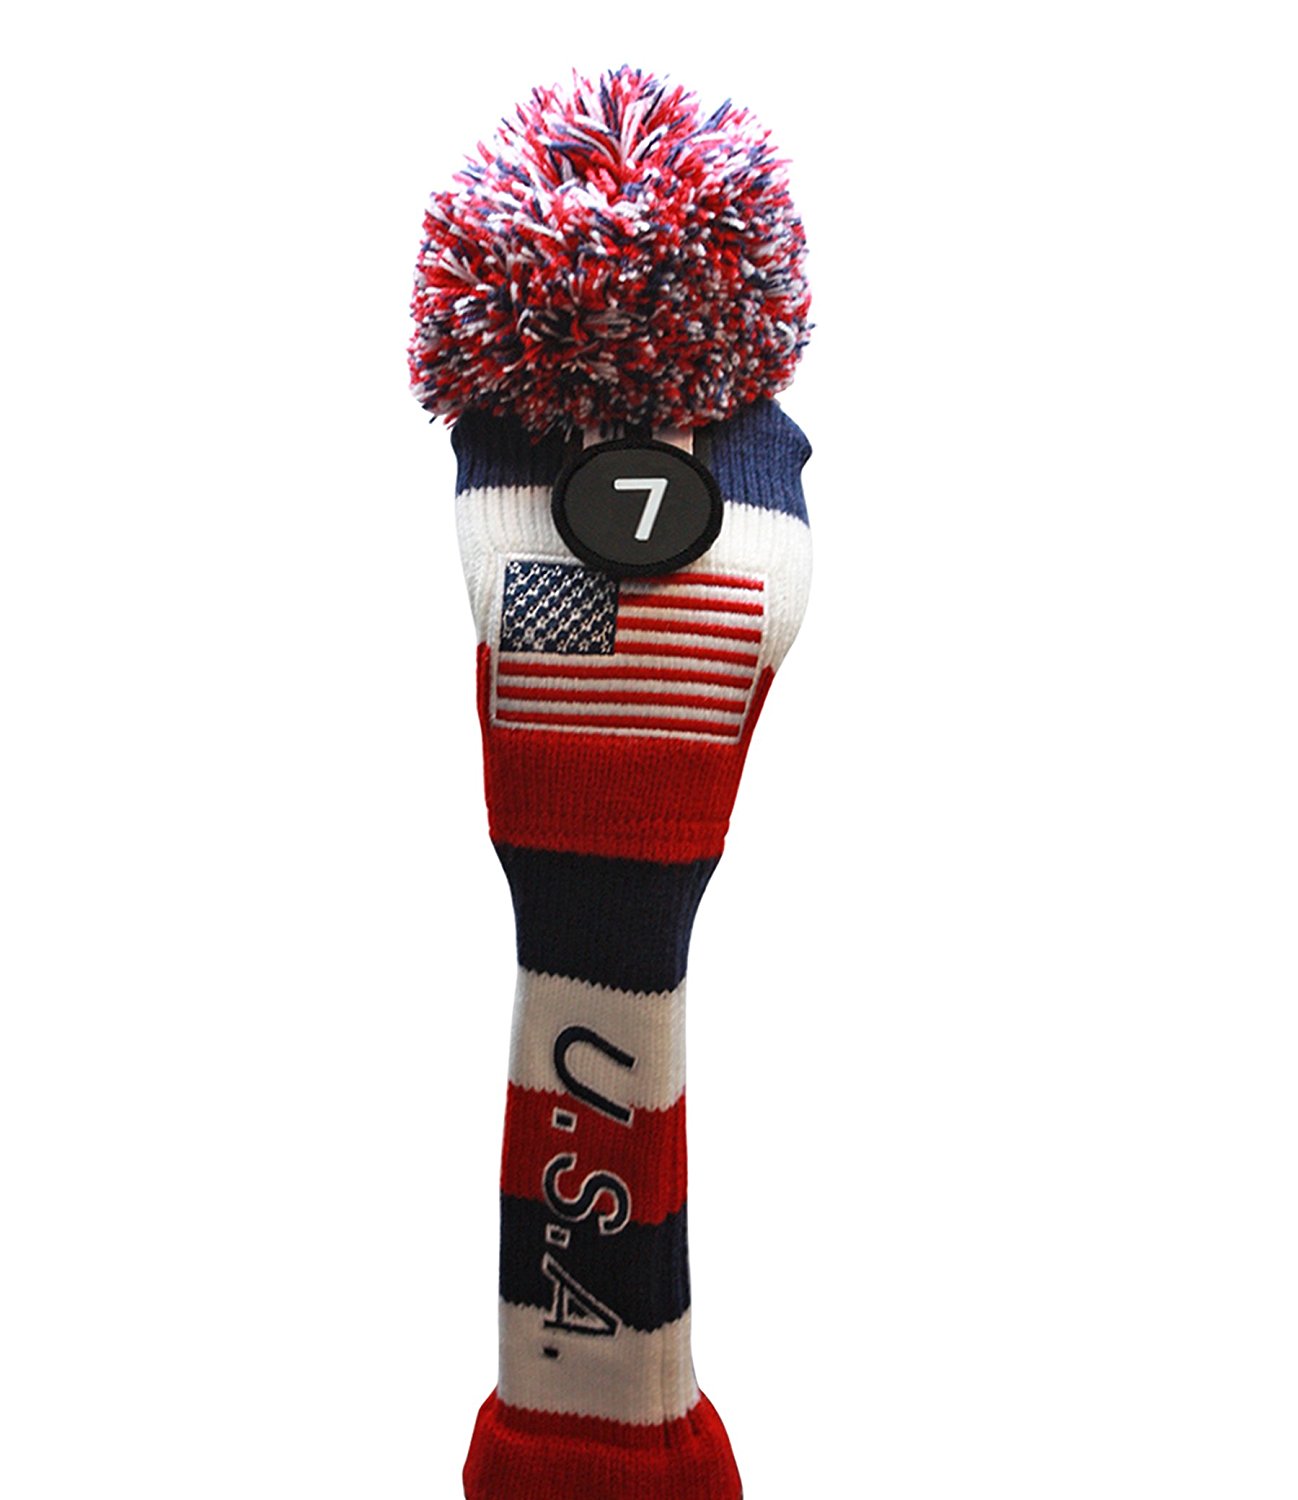 USA Majek Golf Driver 1 3 5 7 9 Fairway Woods Headcovers Pom Pom Knit Limited Edition Vintage Classic Traditional Flag Stars Red White Blue Stripes Retro Head Cover Fits 460cc Drivers and 260cc Woods - image 5 of 9